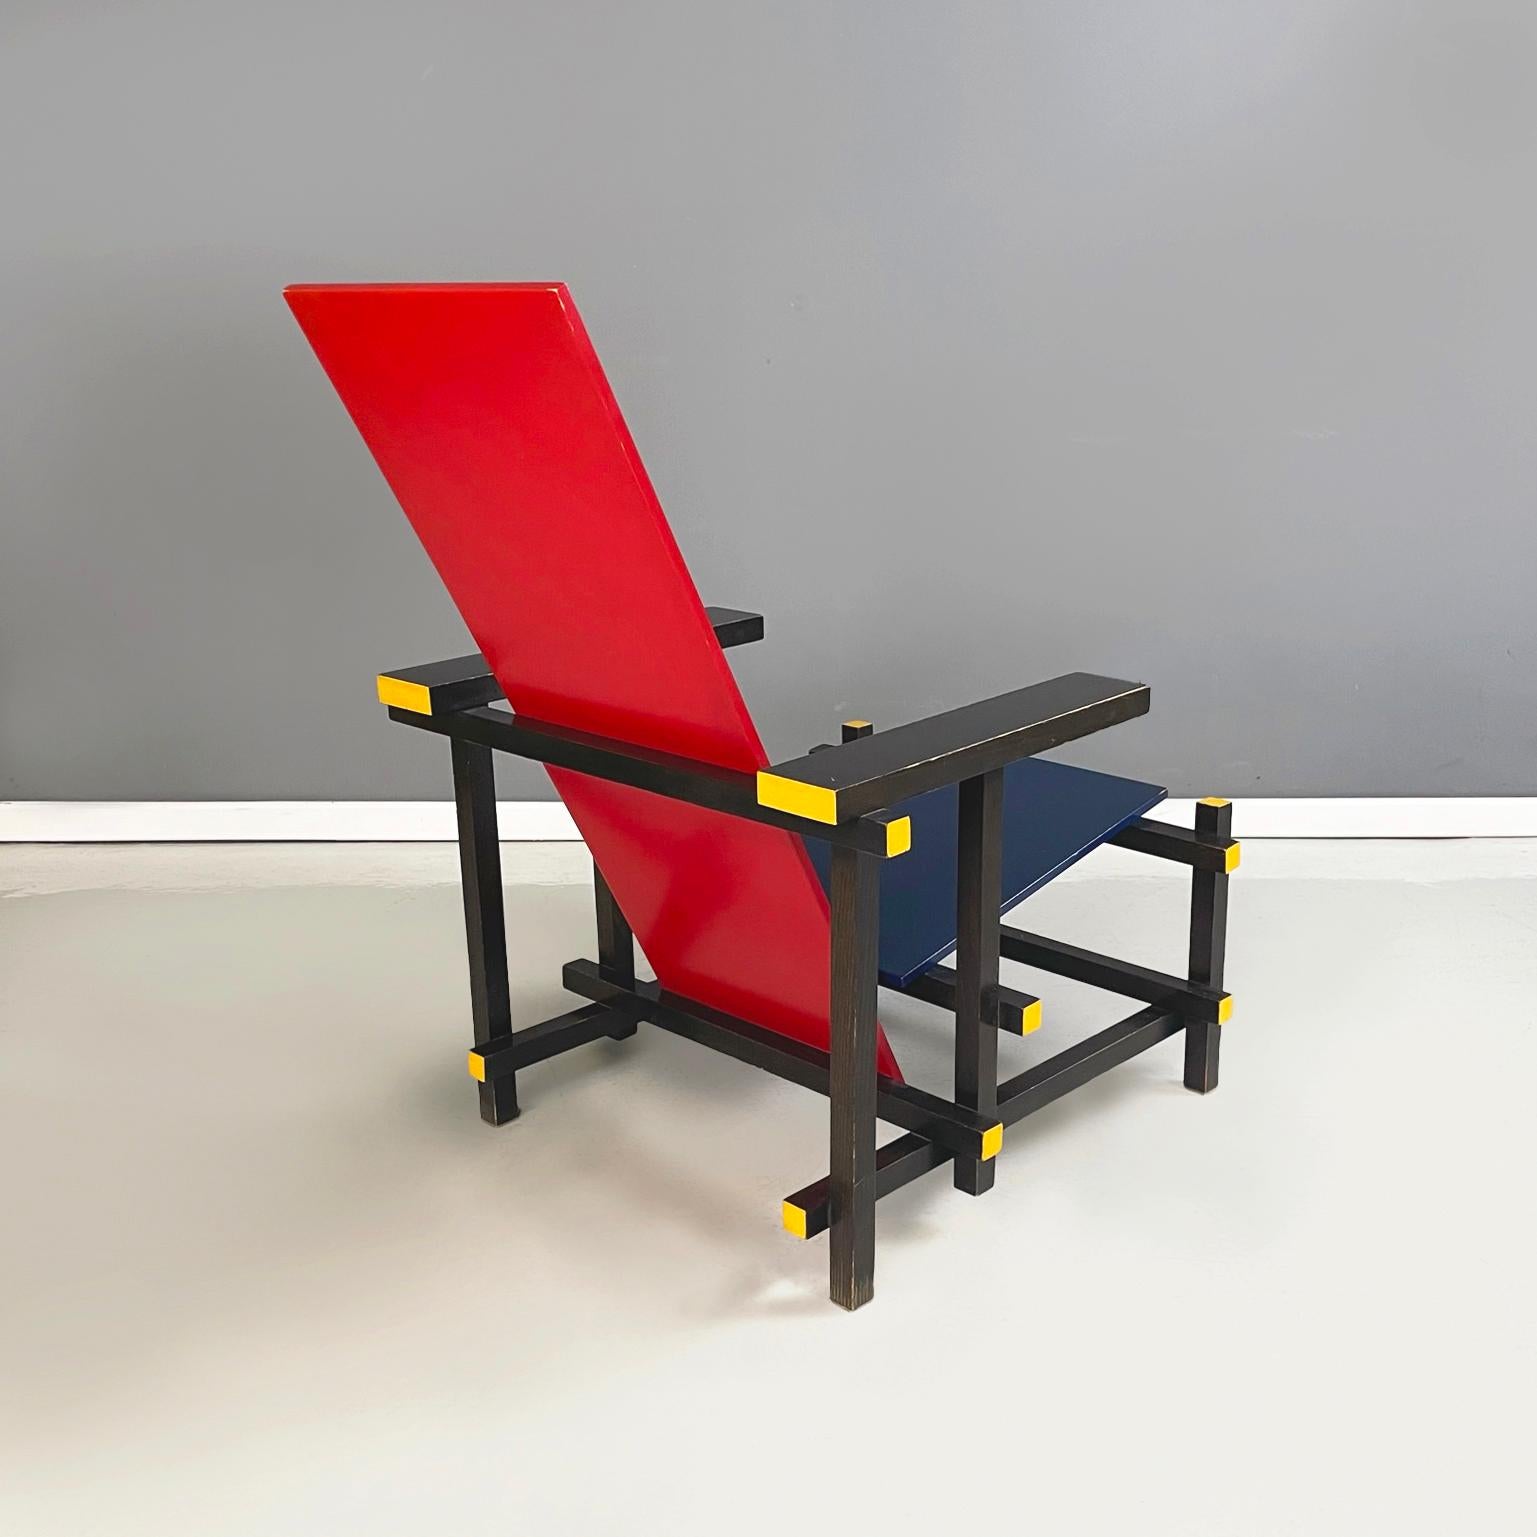 Wood Italian Bauhaus Armchair Red and Blue by Rietveld 1st production Cassina 1971 For Sale